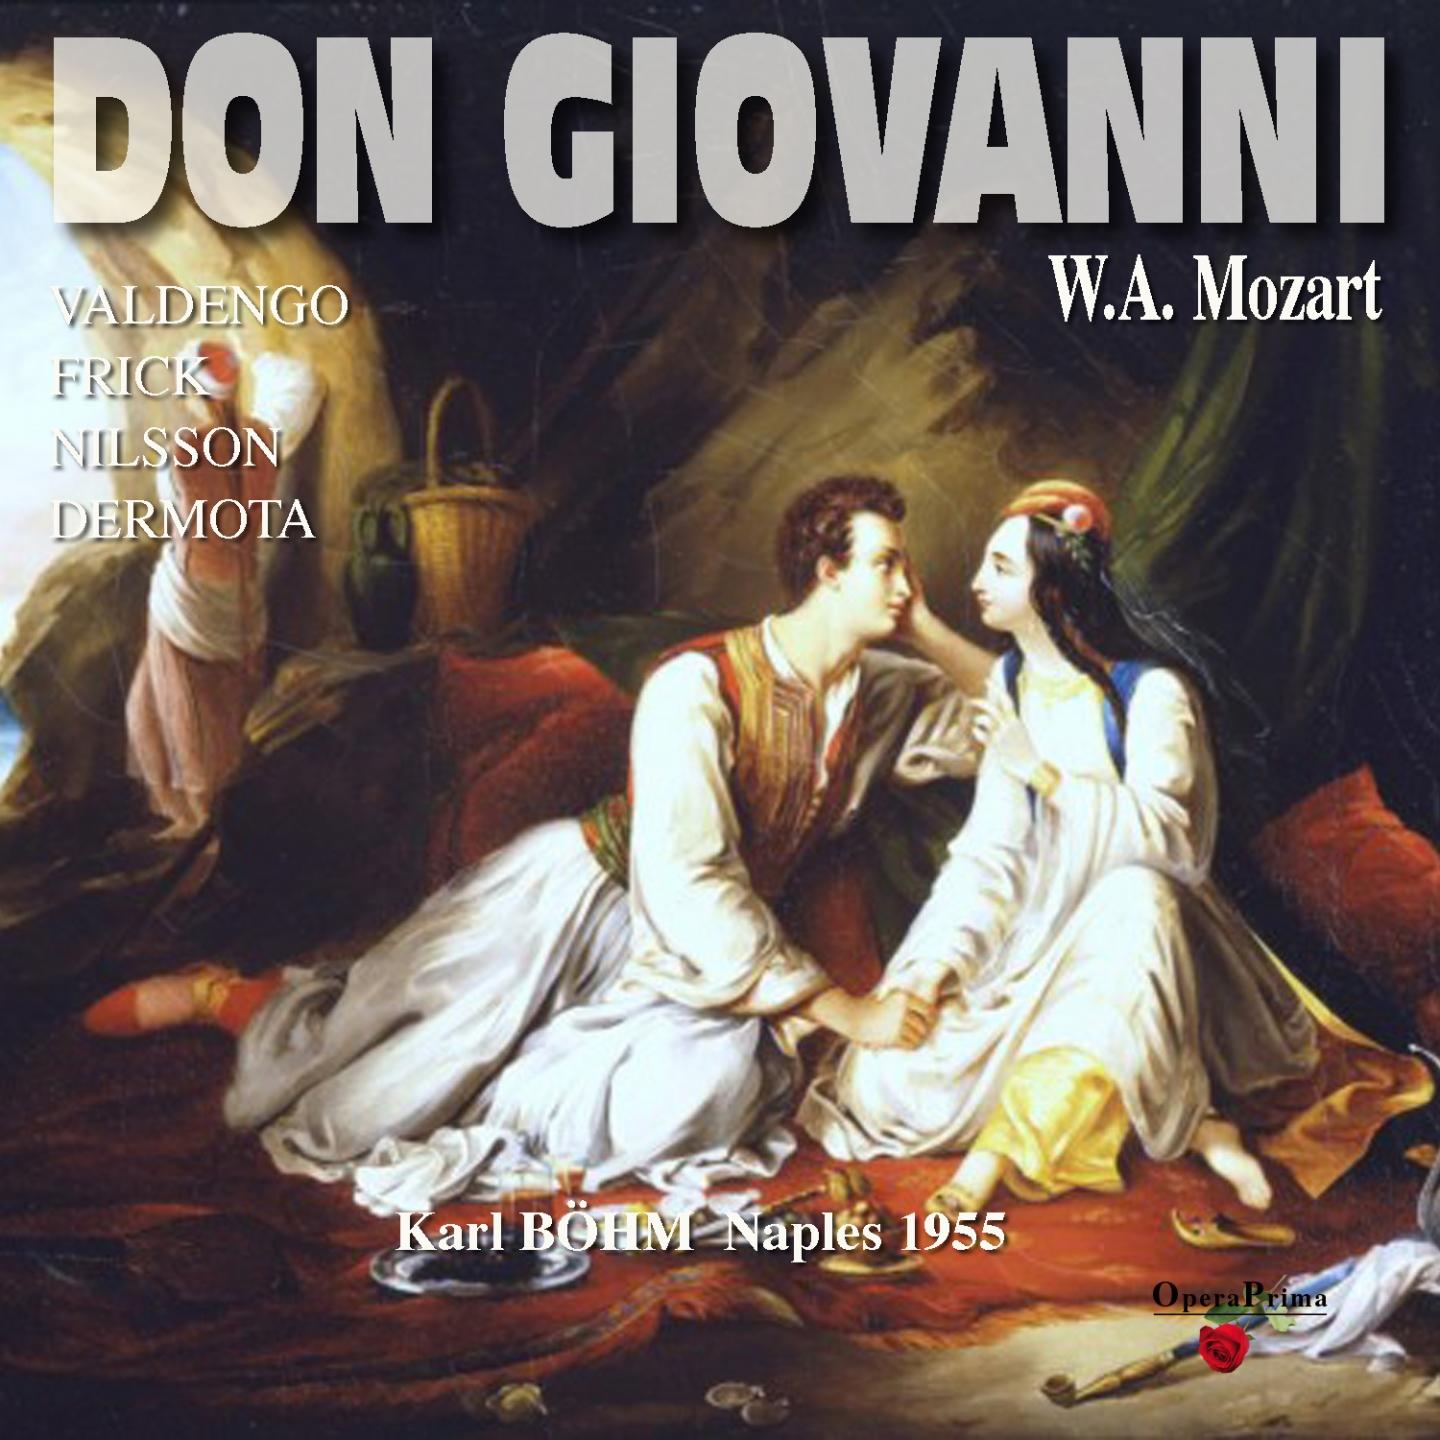 Don Giovanni: Act I - "Or sai chi l'onore"